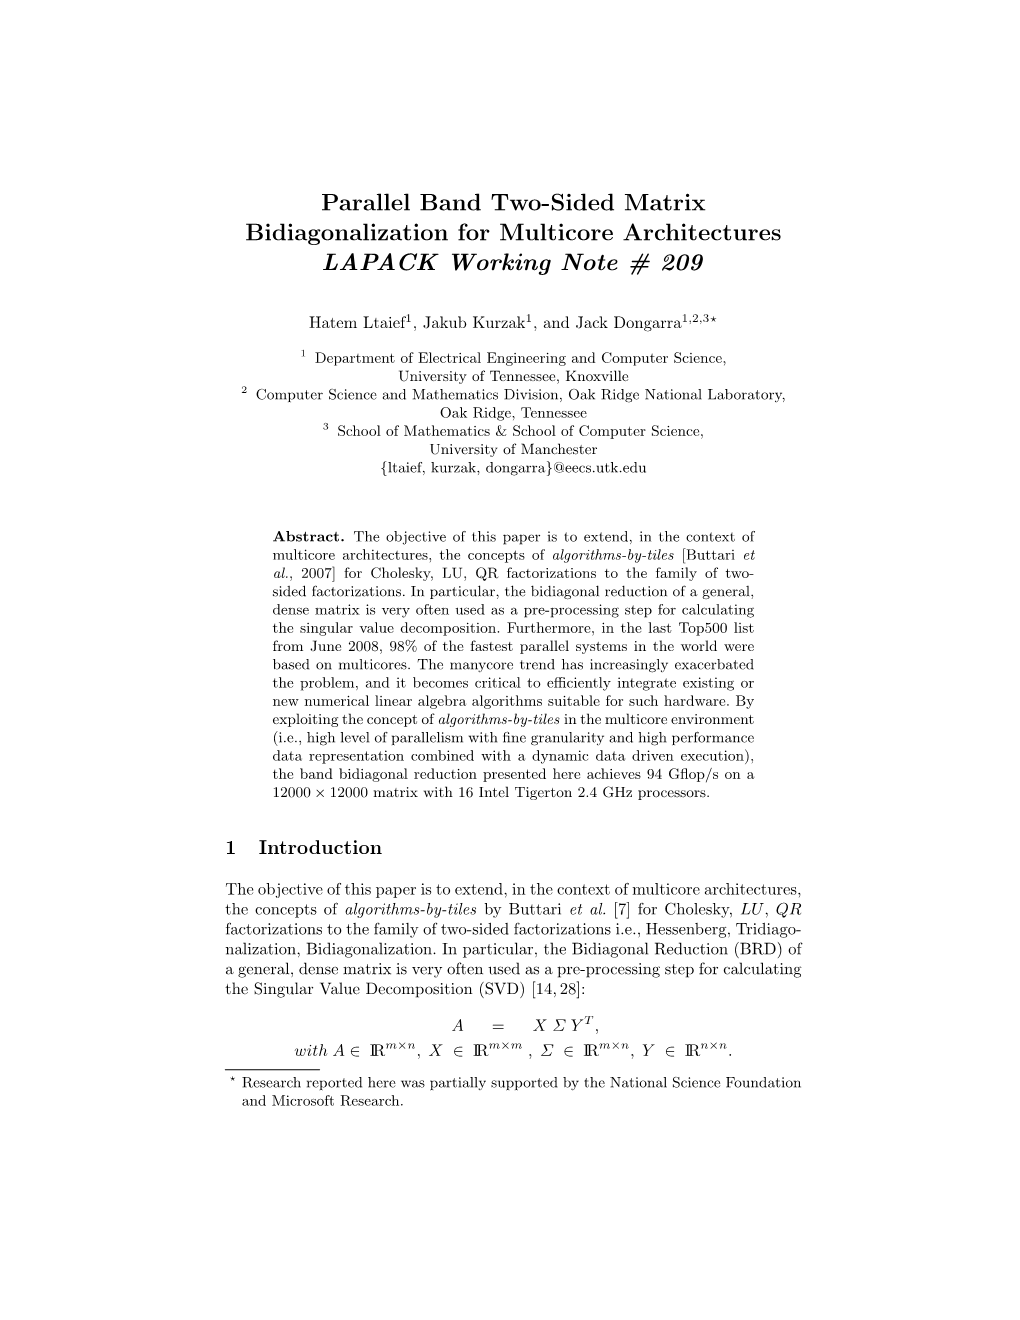 Parallel Band Two-Sided Matrix Bidiagonalization for Multicore Architectures LAPACK Working Note # 209